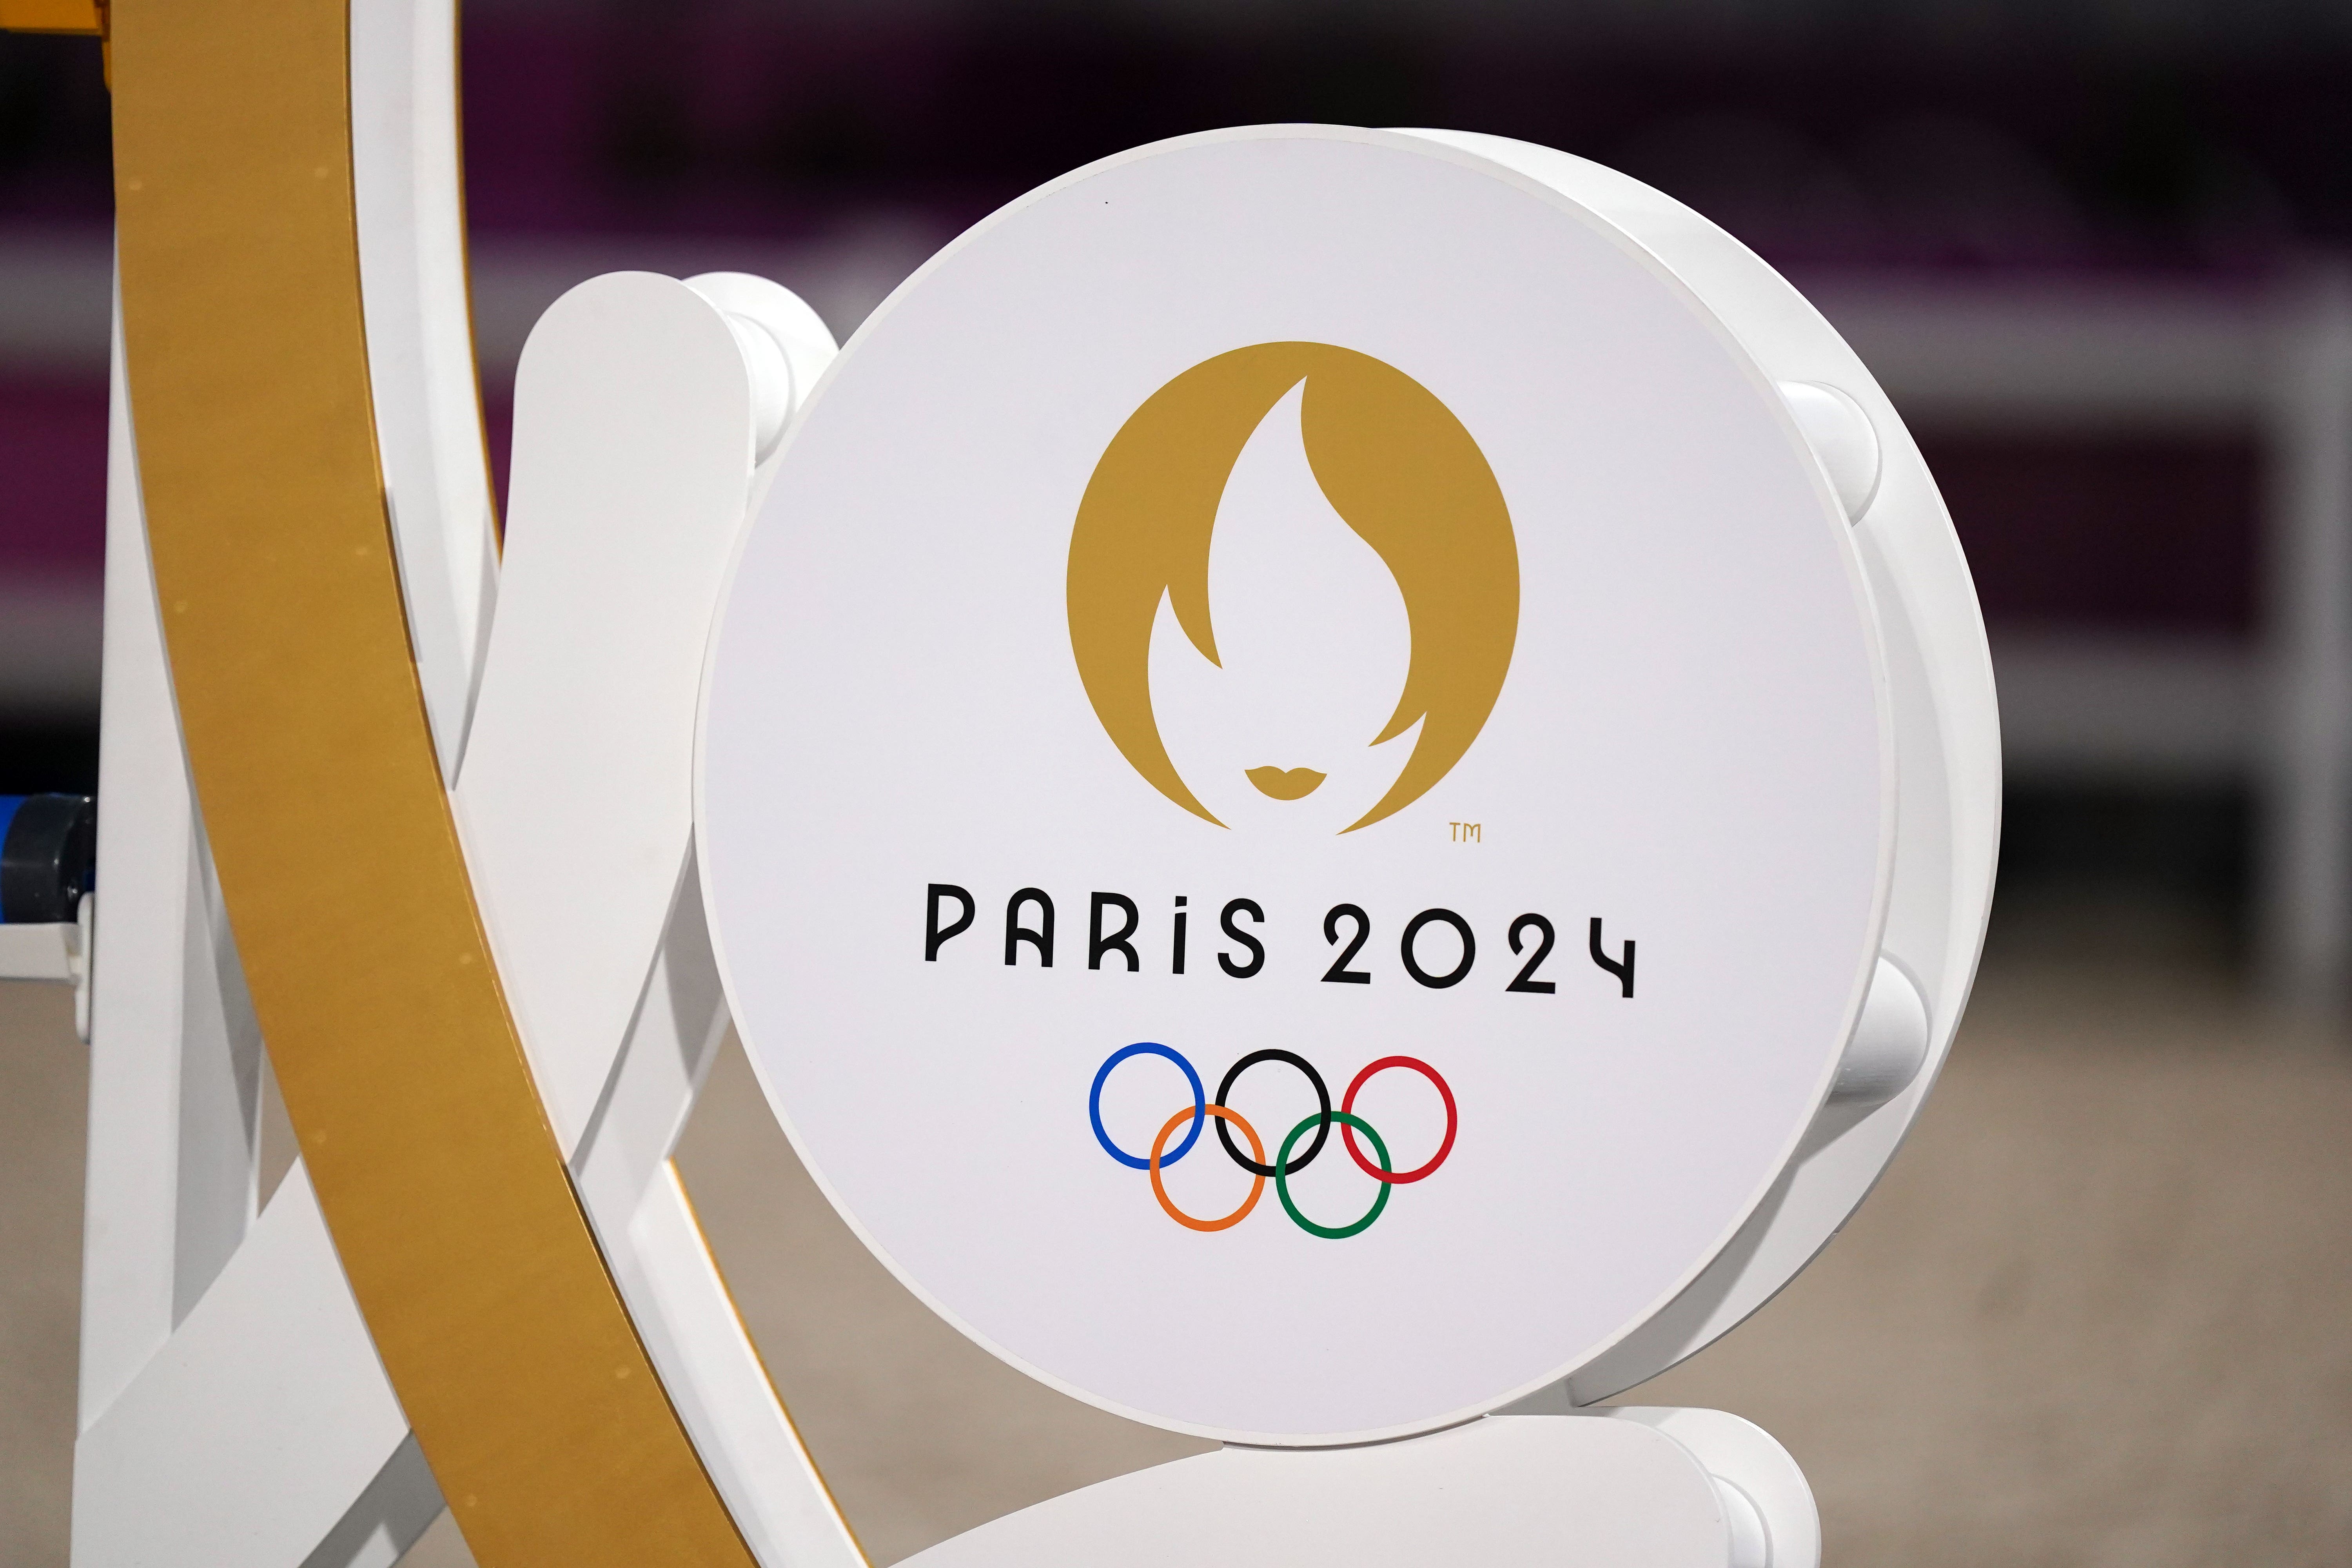 Breaking GB awarded £135,000 by UK Sport to support Paris 2024 Olympic